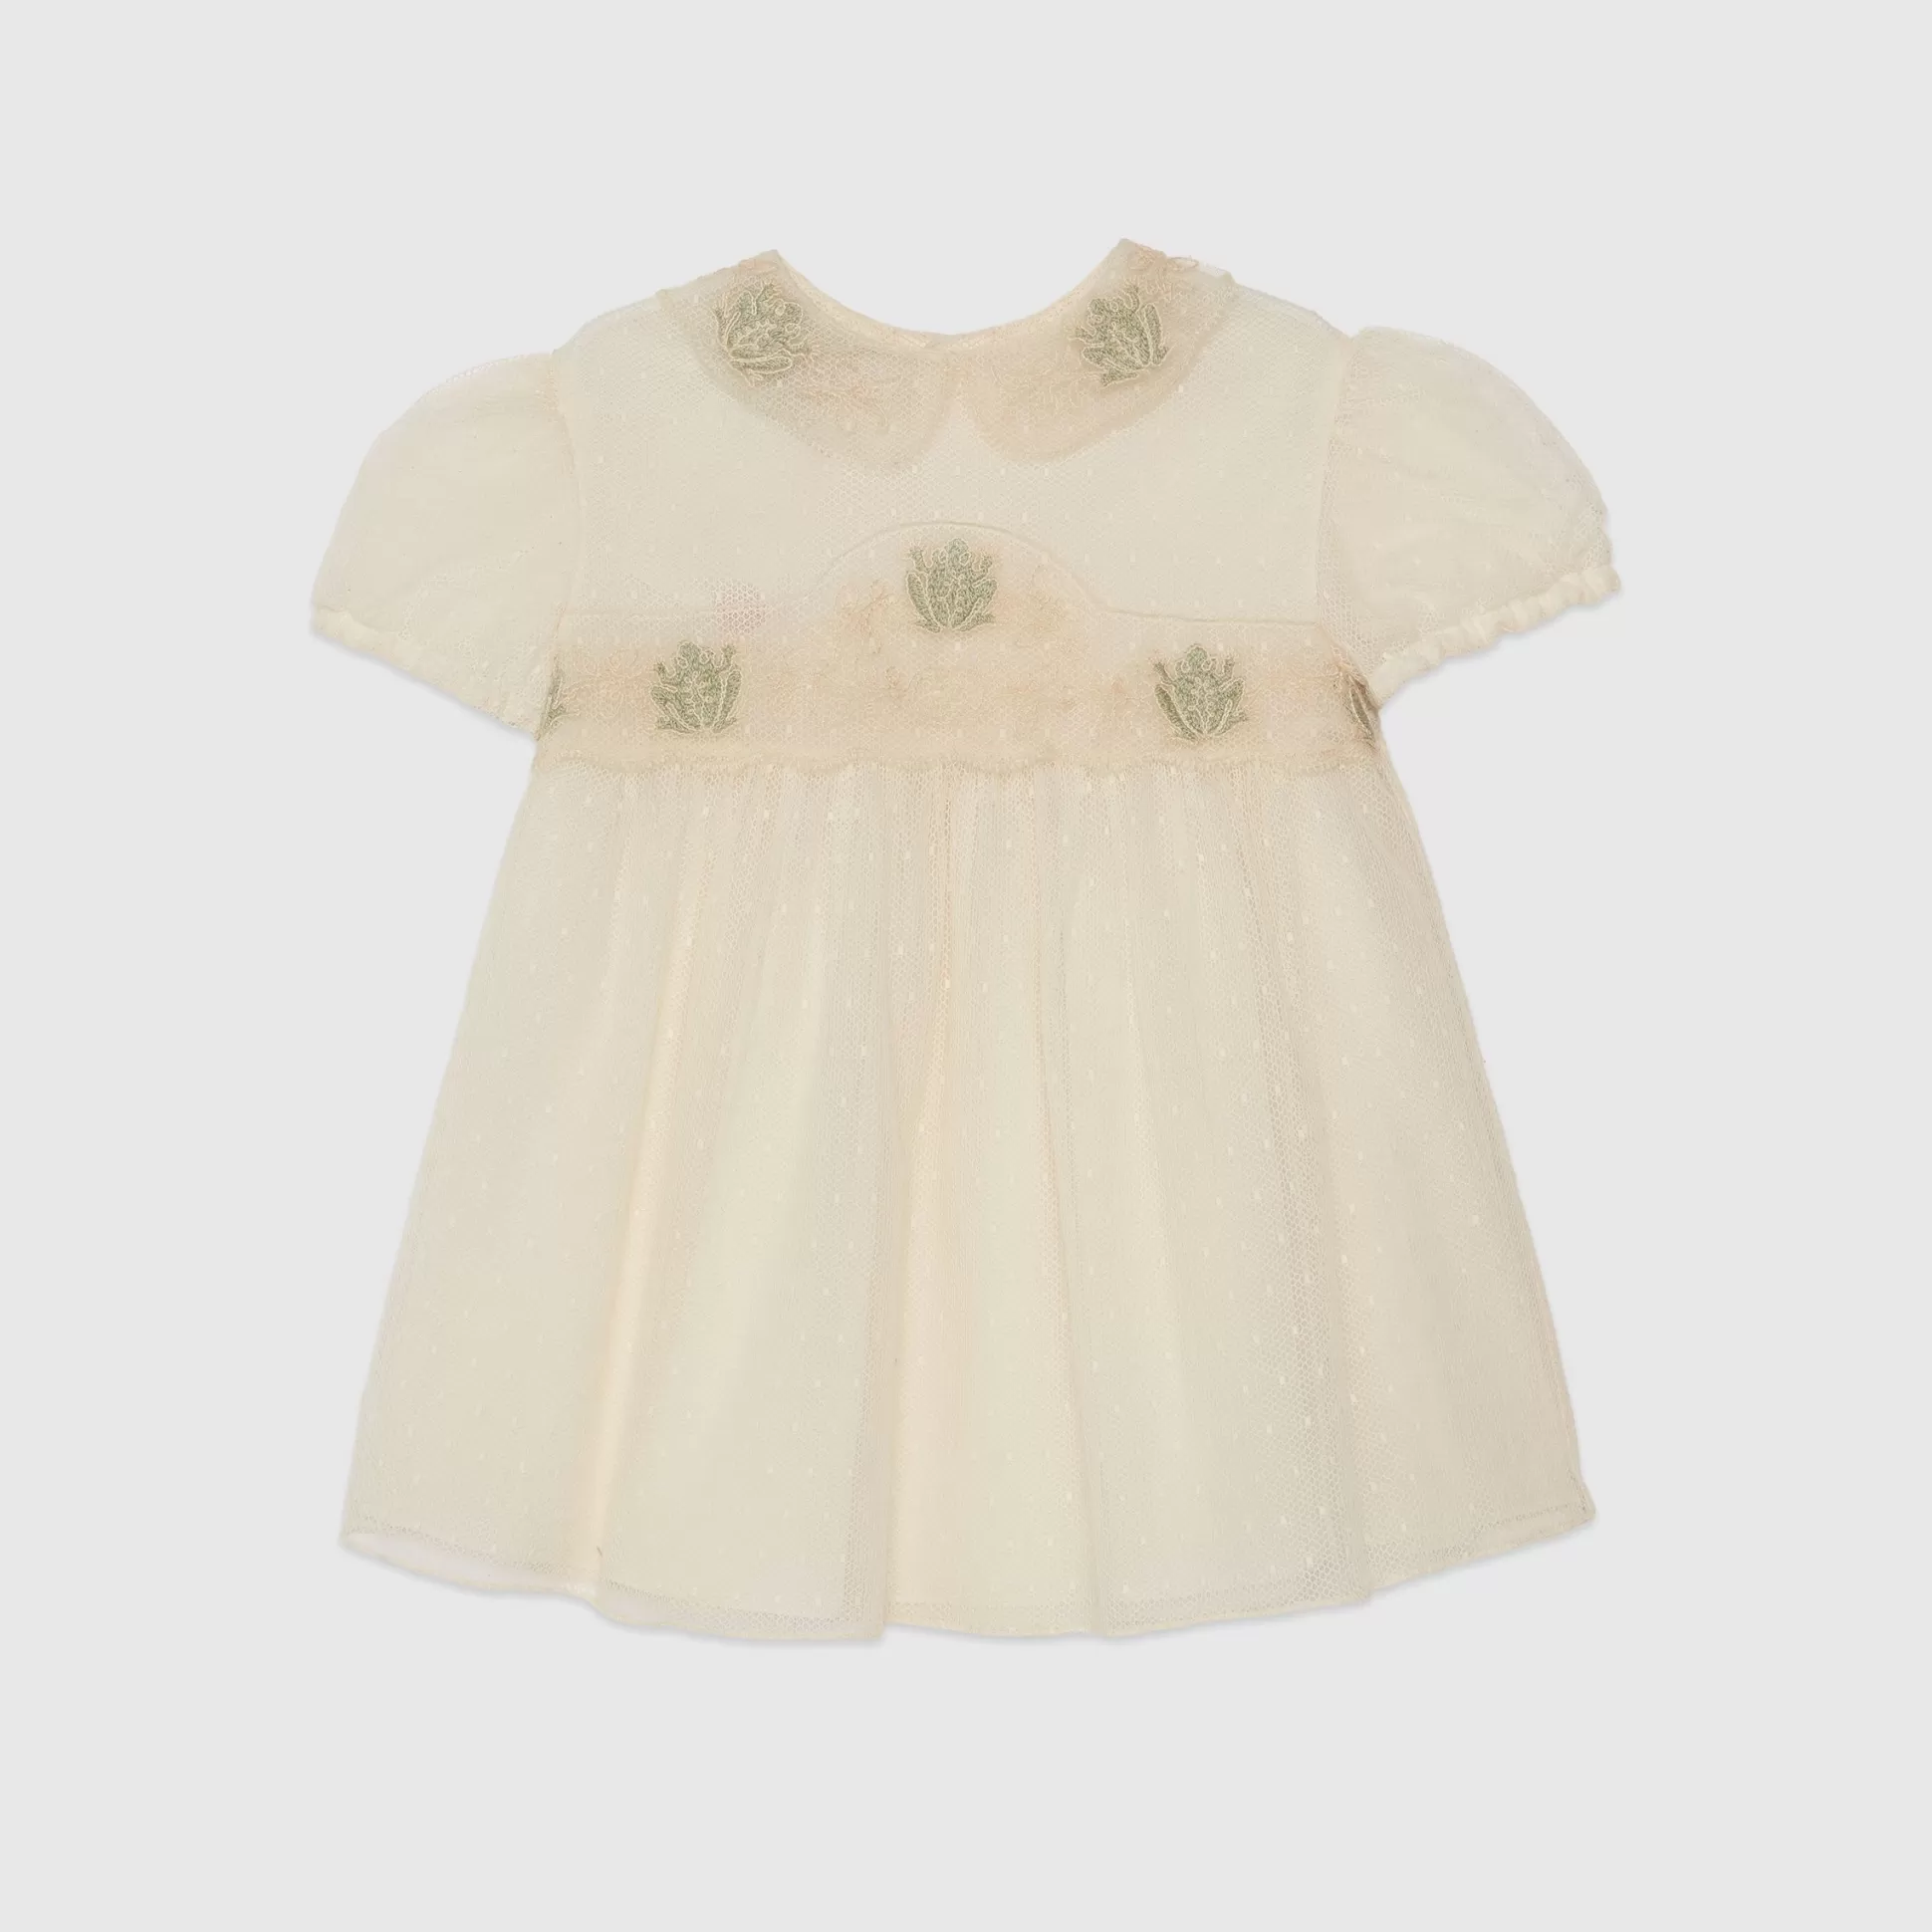 GUCCI Baby Dotted Cotton Tulle Dress-Children Girls (0-36 Months)